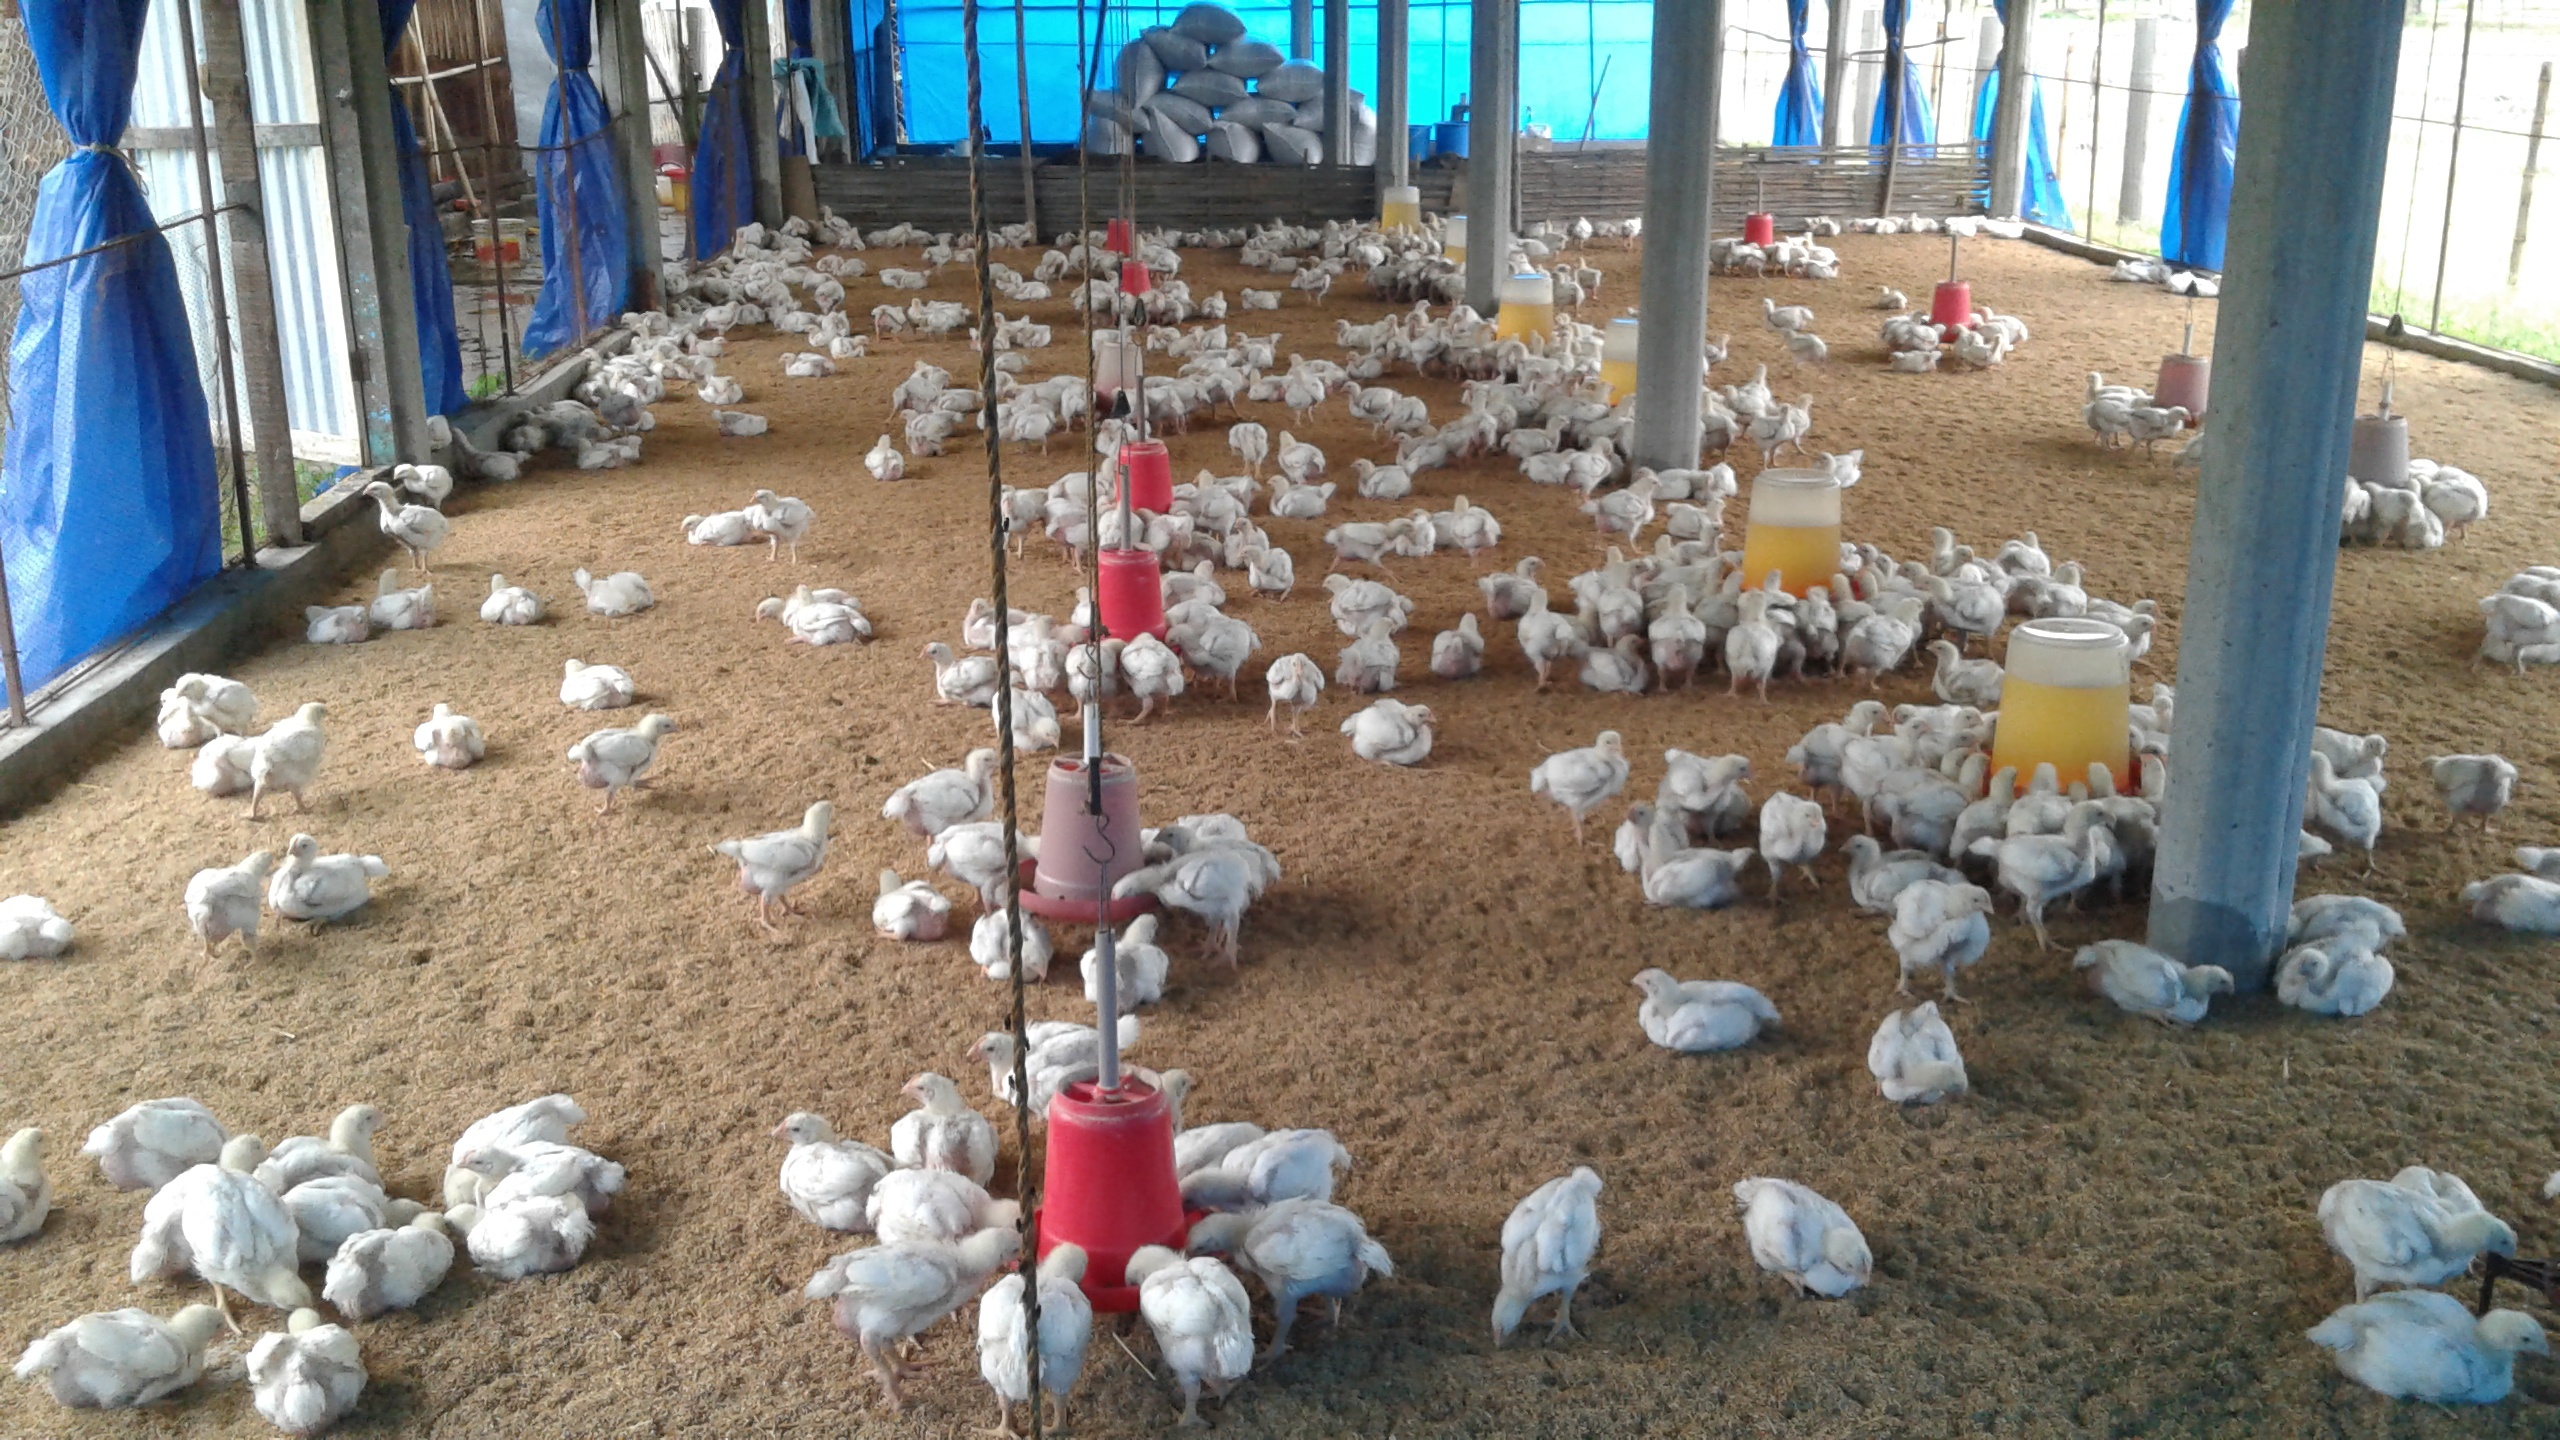 Putting Health & Safety First With Poultry House Cleaning